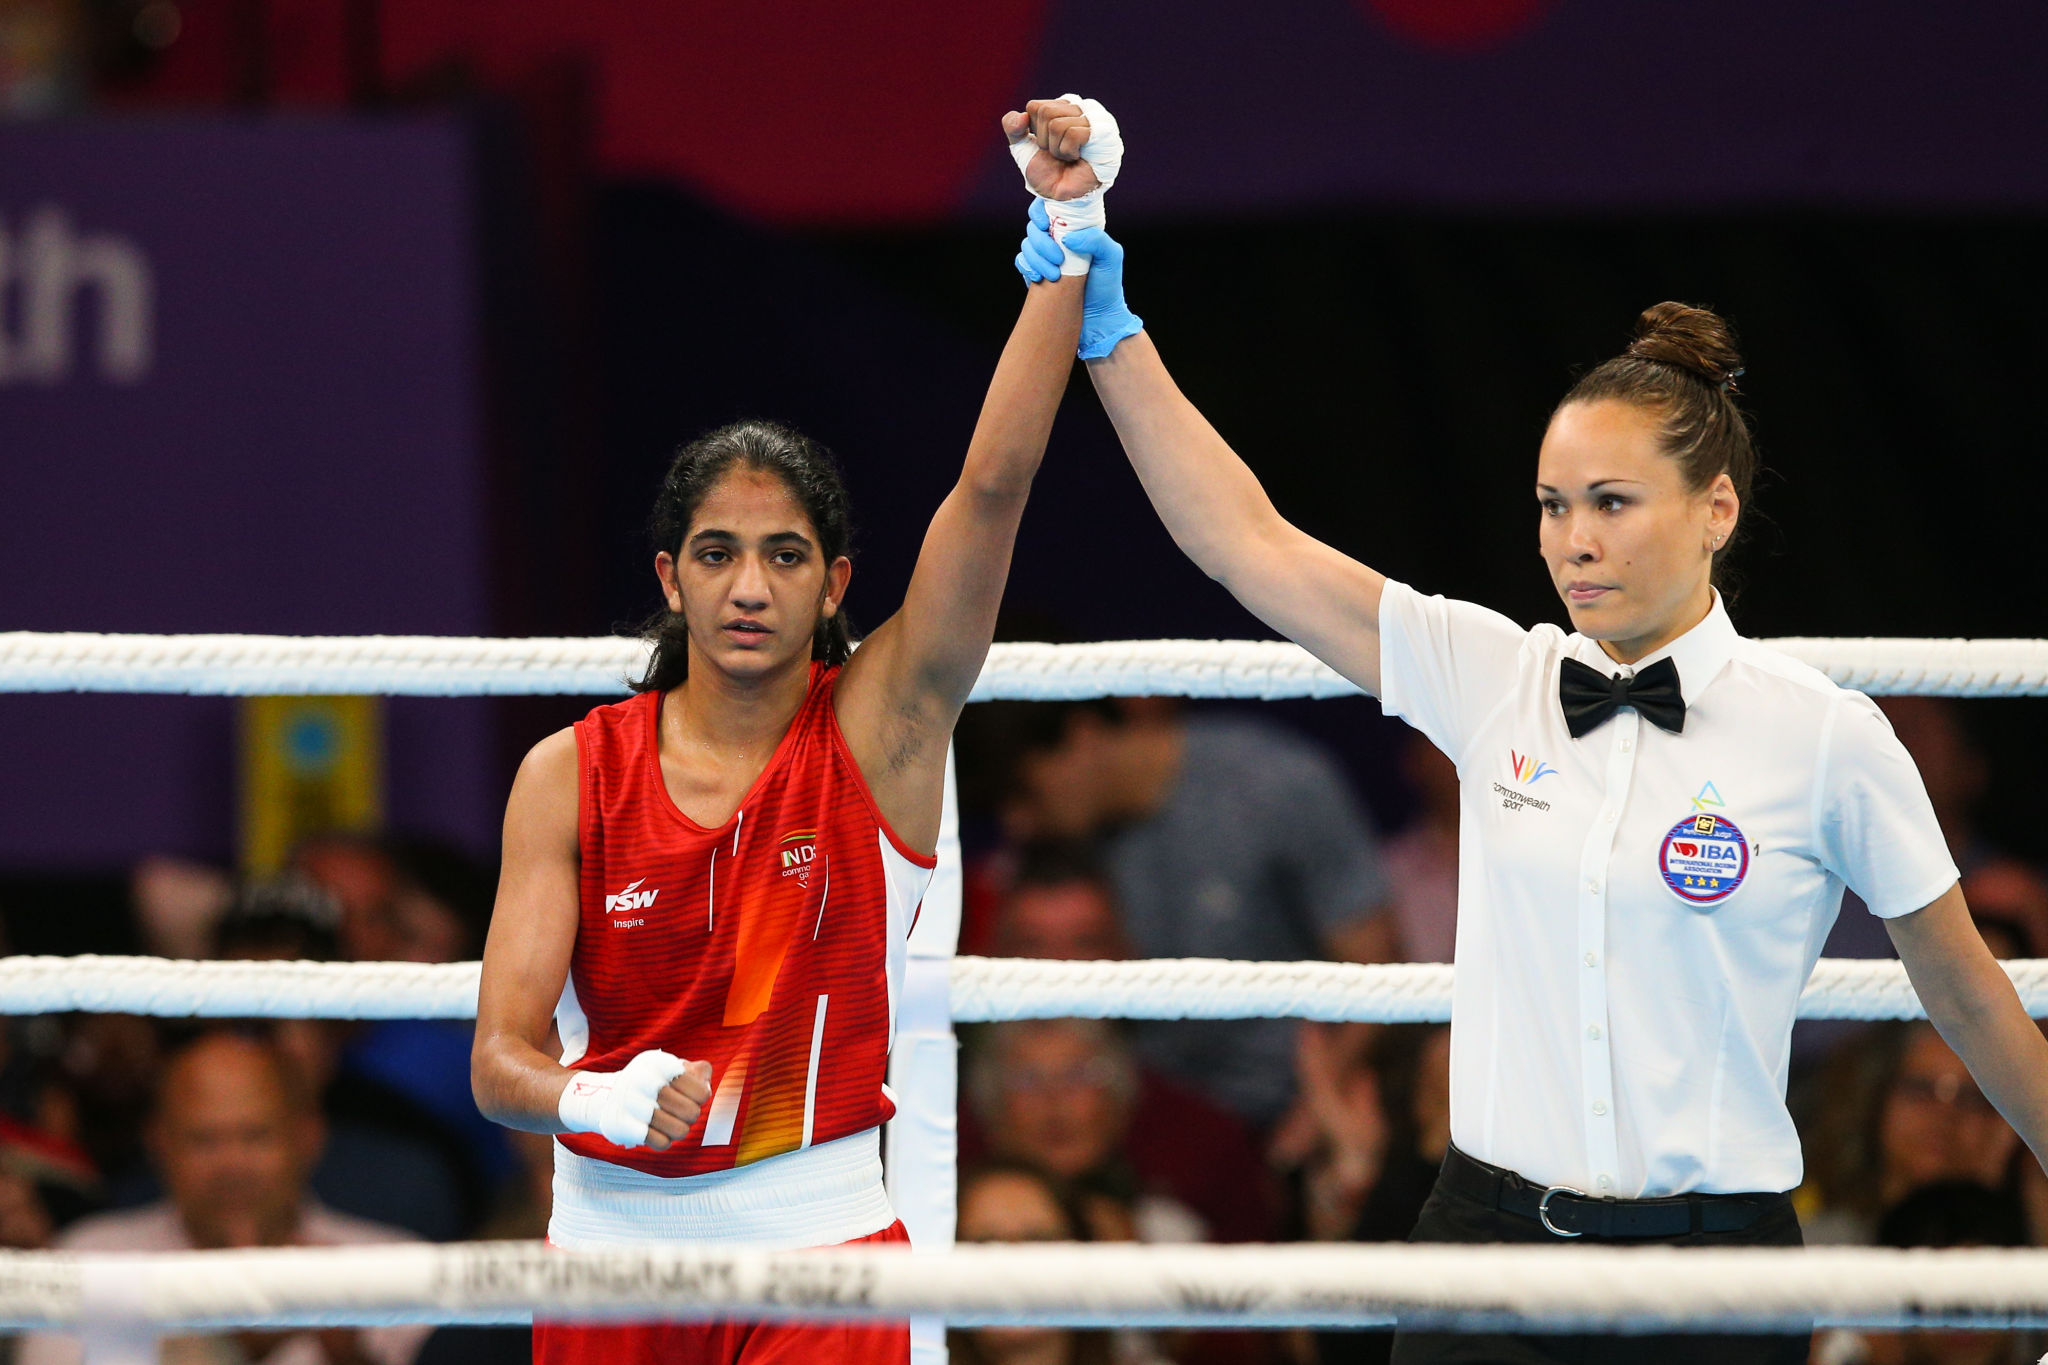 CWG 2022 Boxing LIVE: Hussamuddin & Nitu confirm medal, Lovlina, Nikhat, Ashish Kumar 5 Indians in fray today for SPOT in Semifinals: Follow Indian Boxers in CWG 2022 LIVE